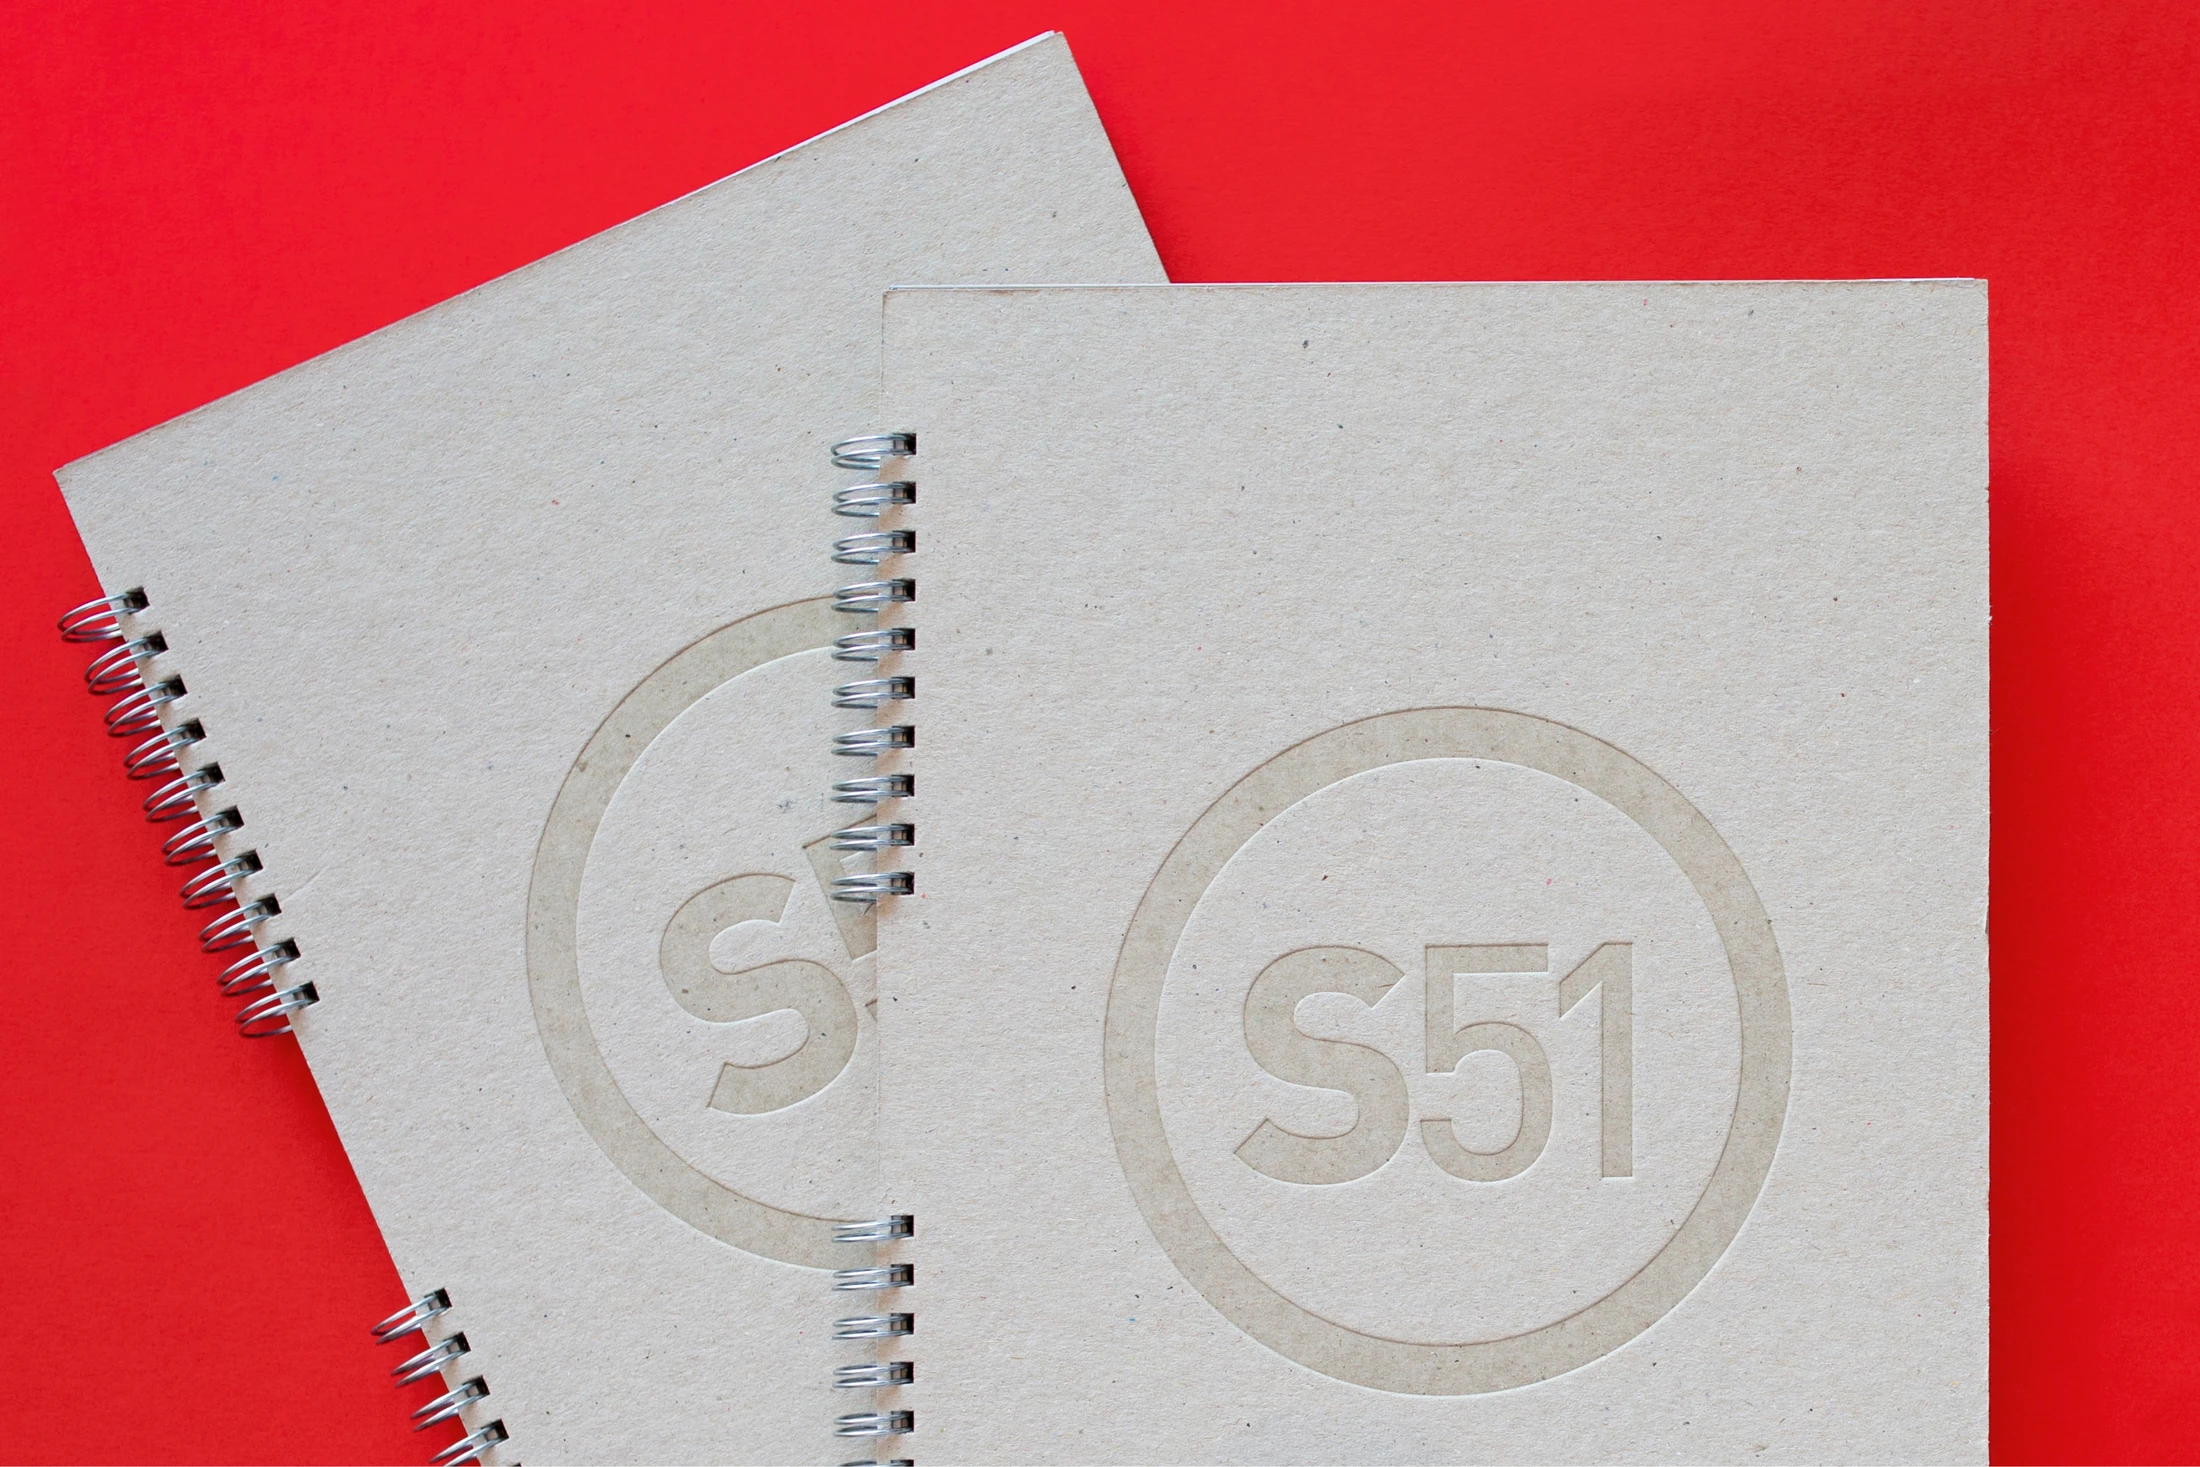 Two notebooks and a stamp on a red background.